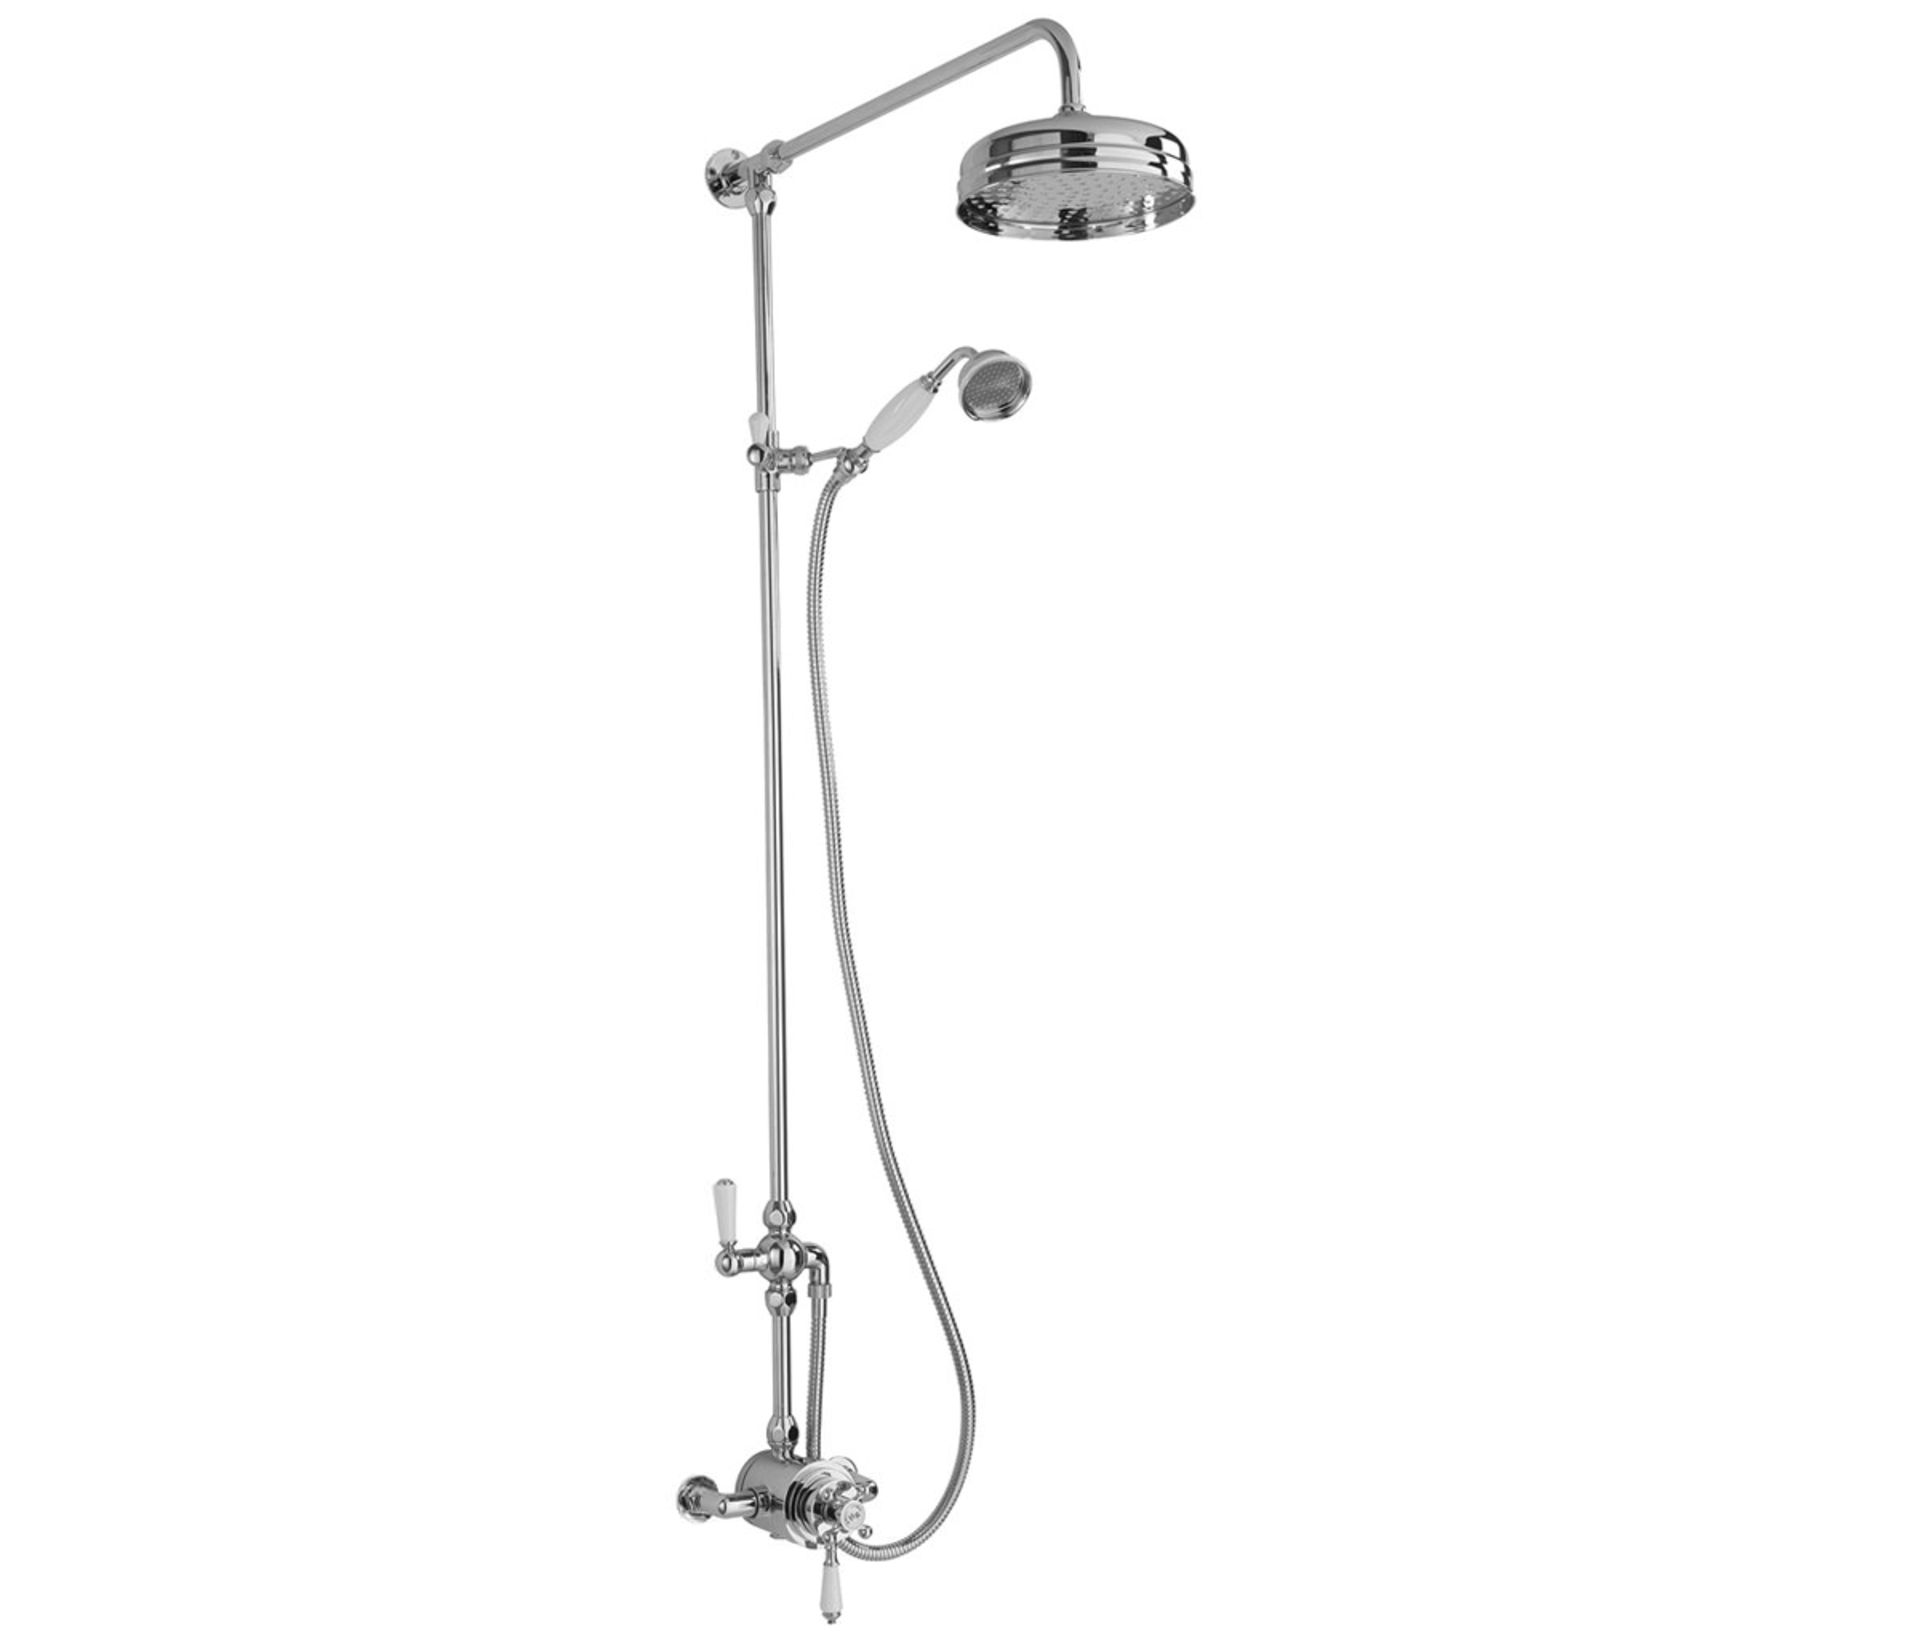 New (U79) Traditional Shower Riser Kit With Shower Head - Handshower And Diverter - Chrome. Rrp...